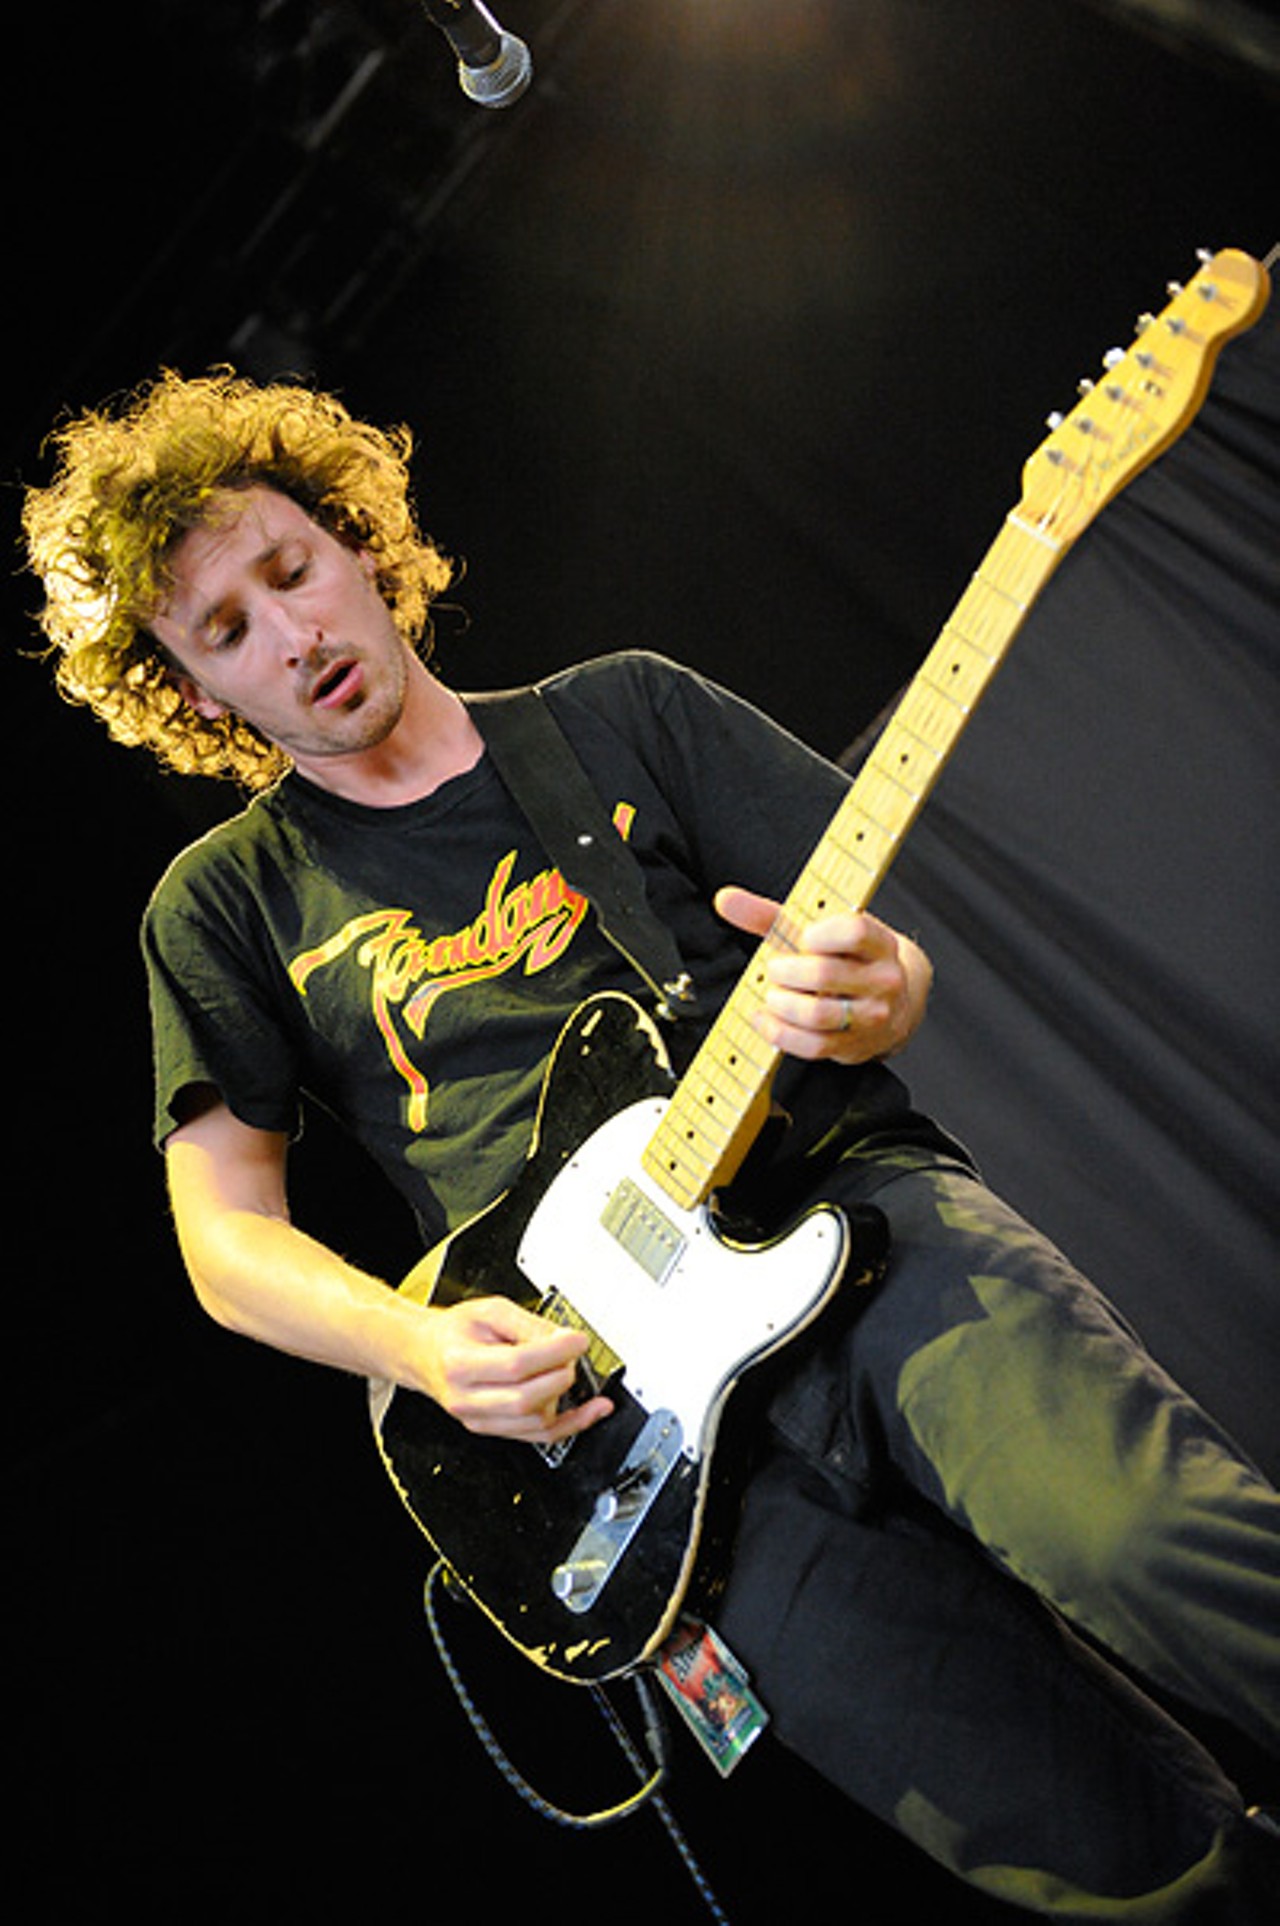 Guitarist Seton Daunt, performing with Fiction Plane in their opening performance on the Unity Tour.